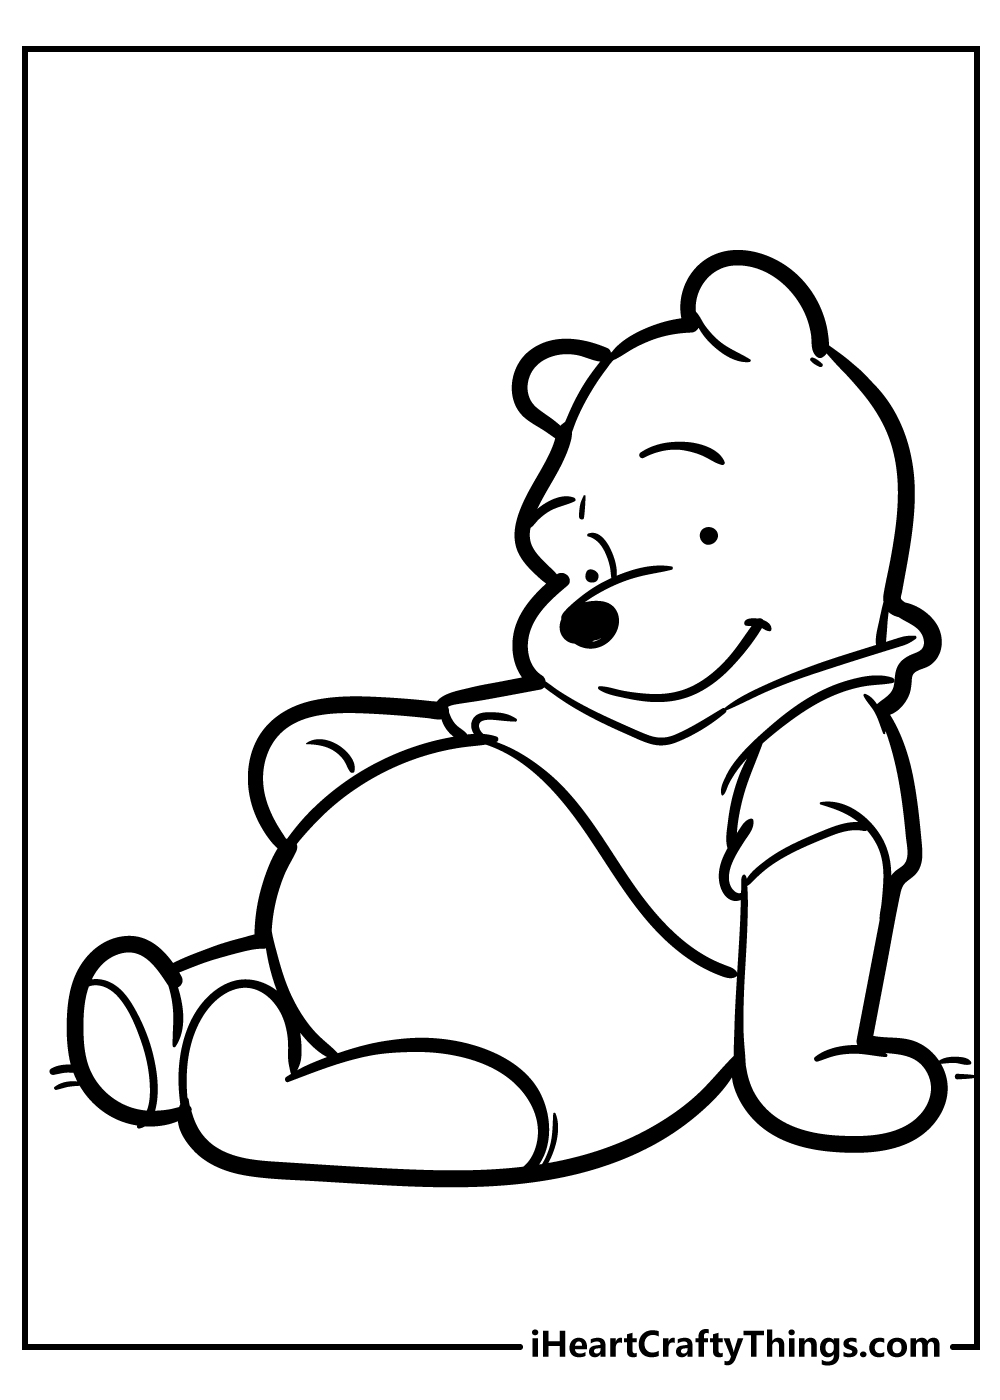 Winnie The Pooh Coloring Pages Updated 20